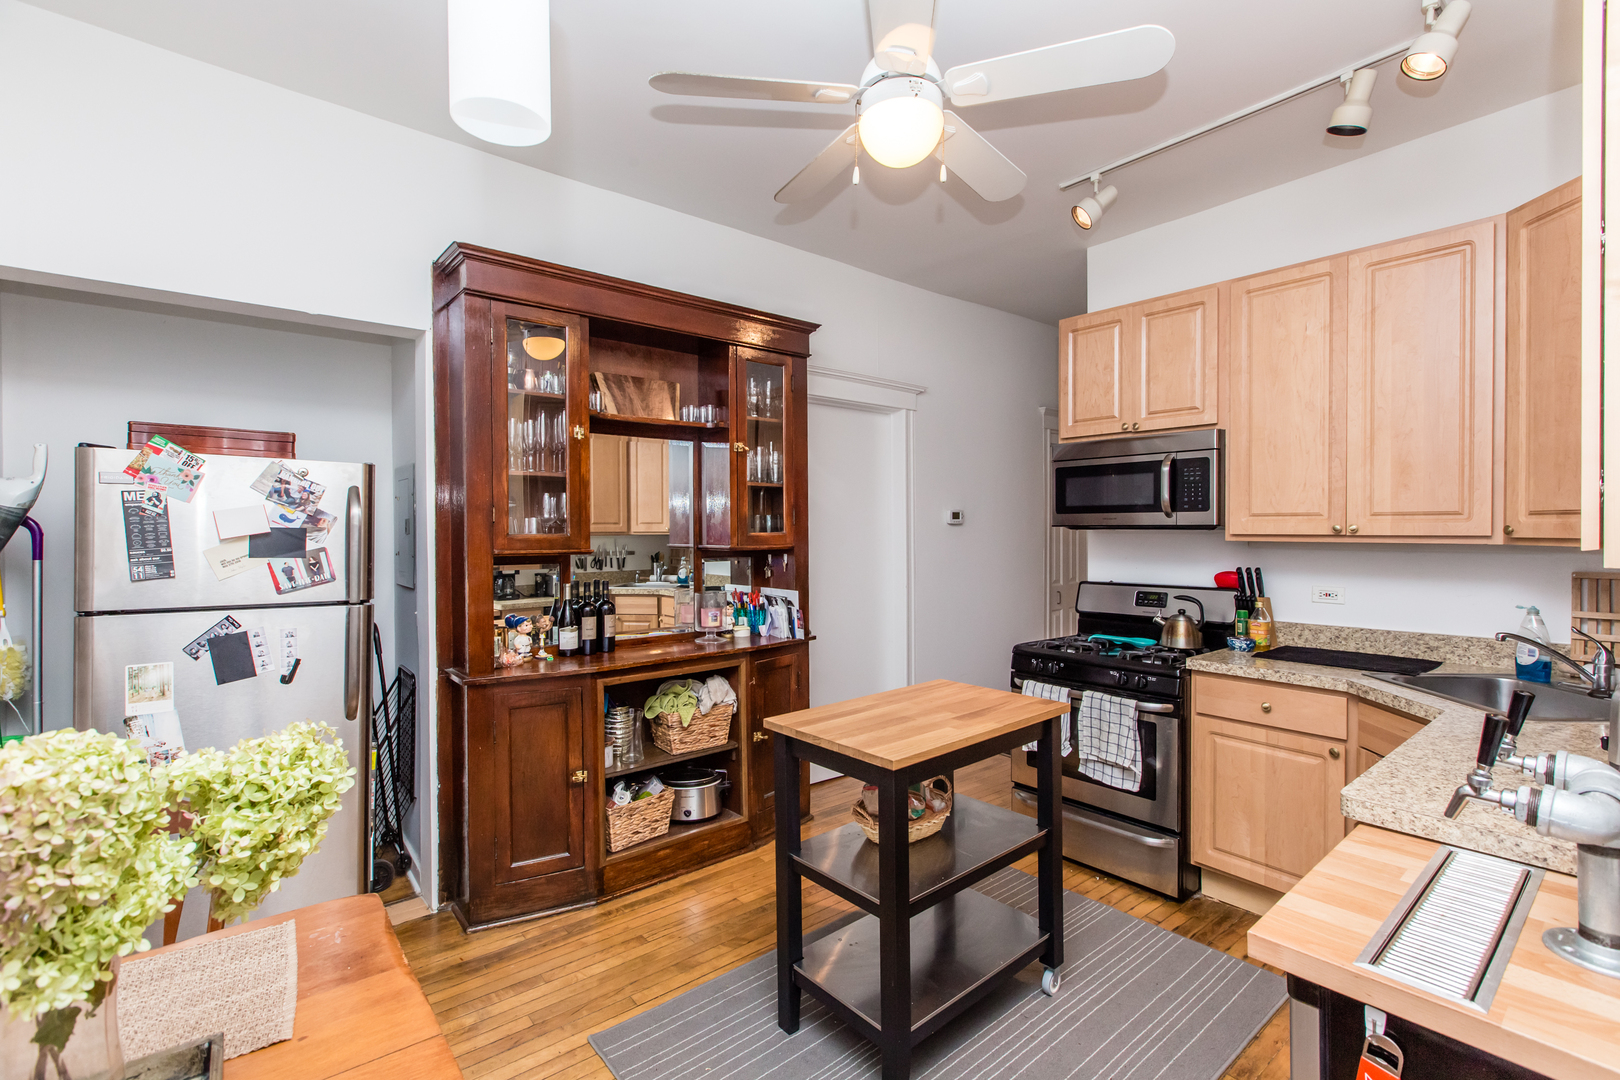 Spacious 2 Bedroom/1 Bath in Hot Wicker Park Location! Central A/C! Stainless Steel Appliances!